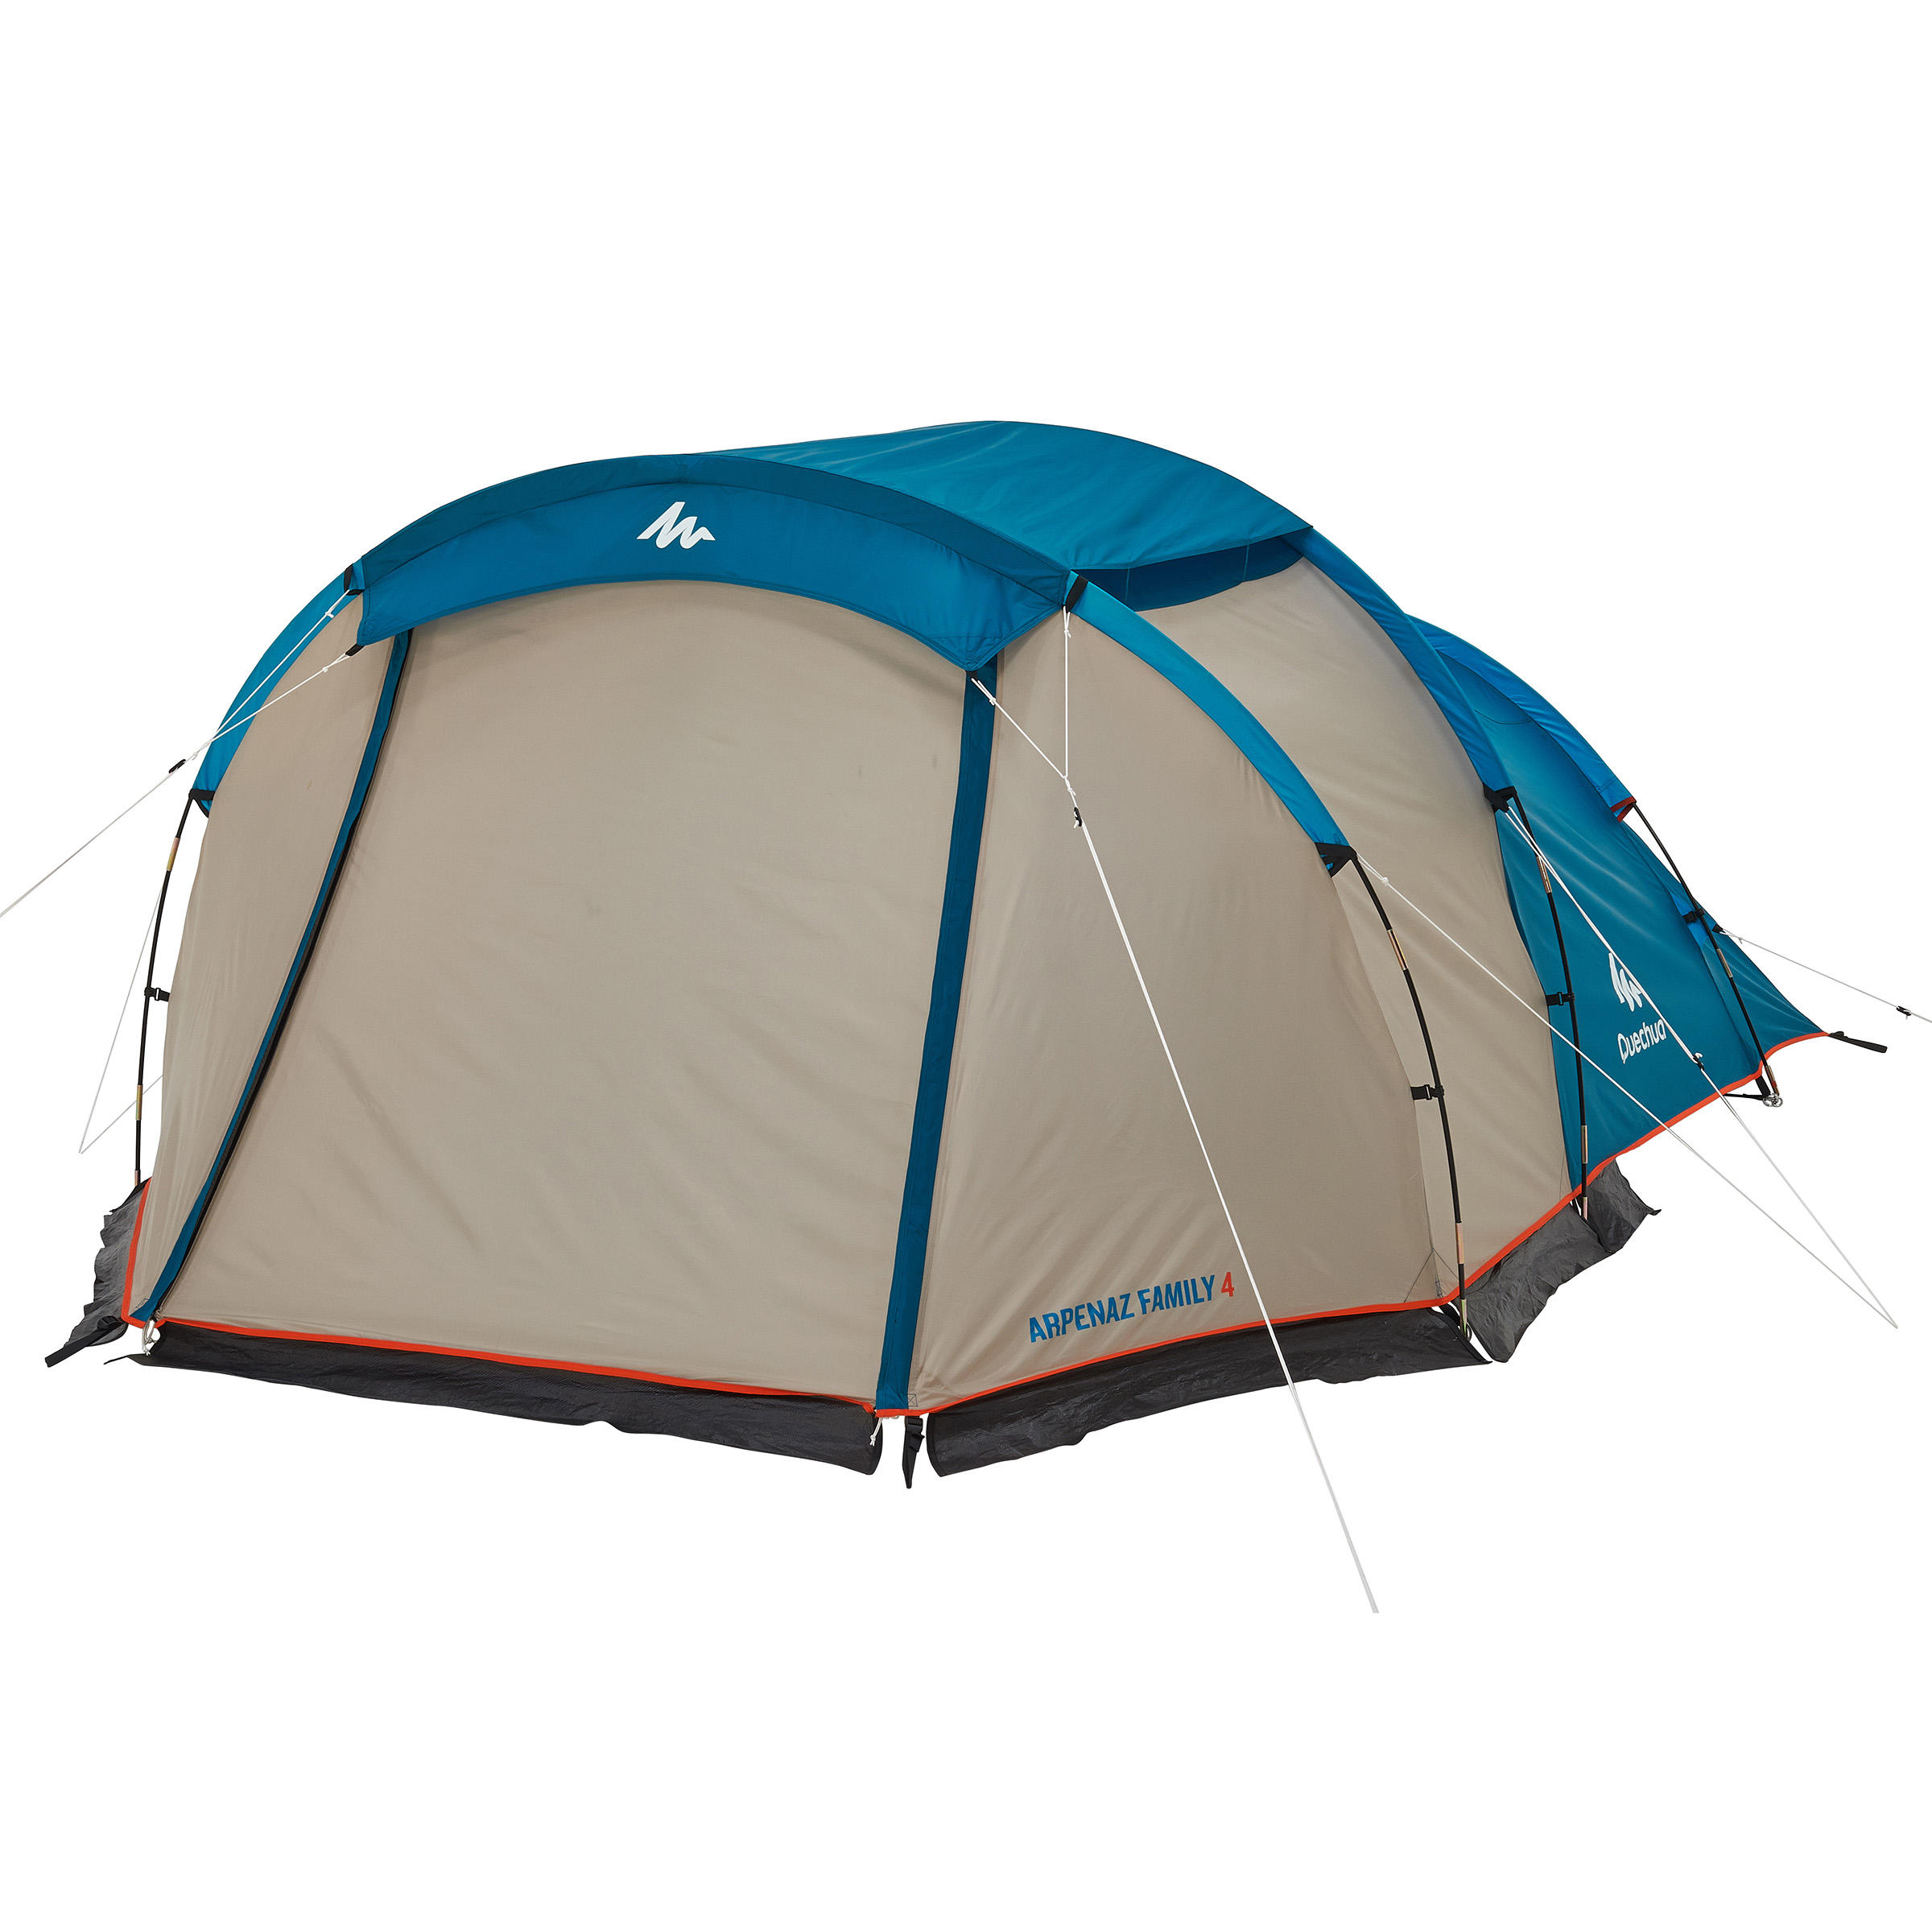 arpenaz 4 family camping tent